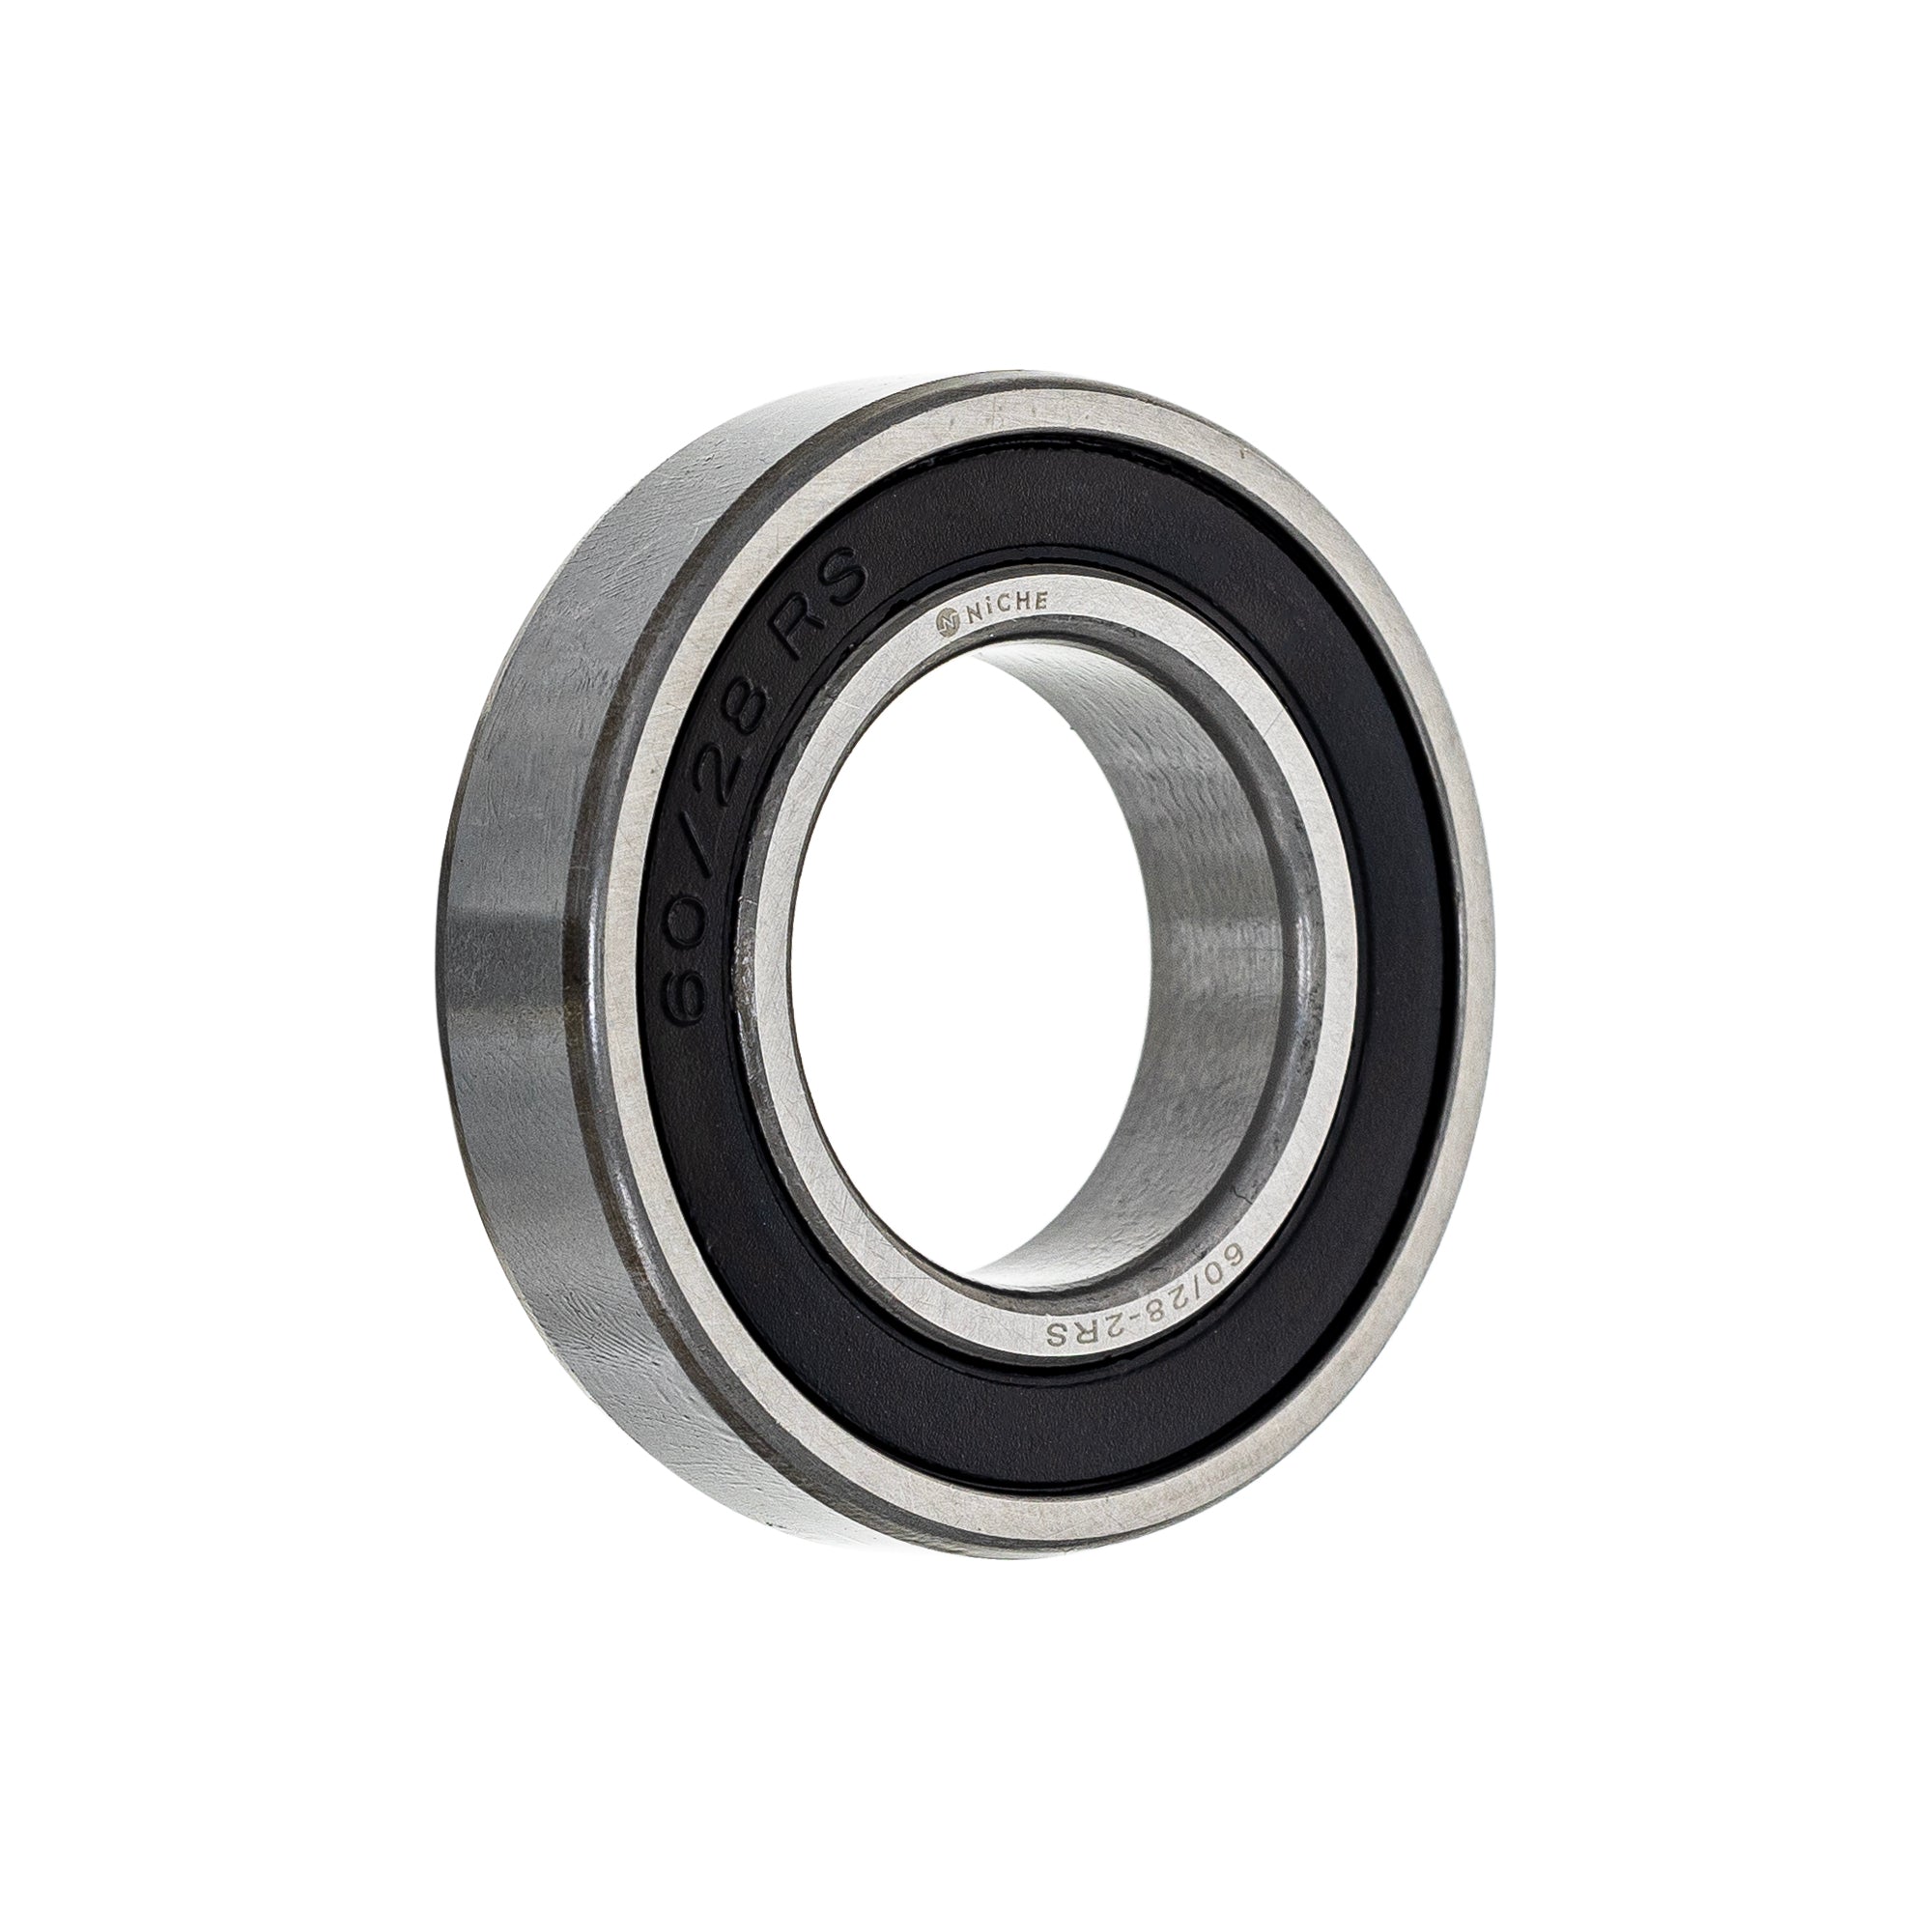 NICHE MK1008650 Bearing & Seal Kit for zOTHER YZF